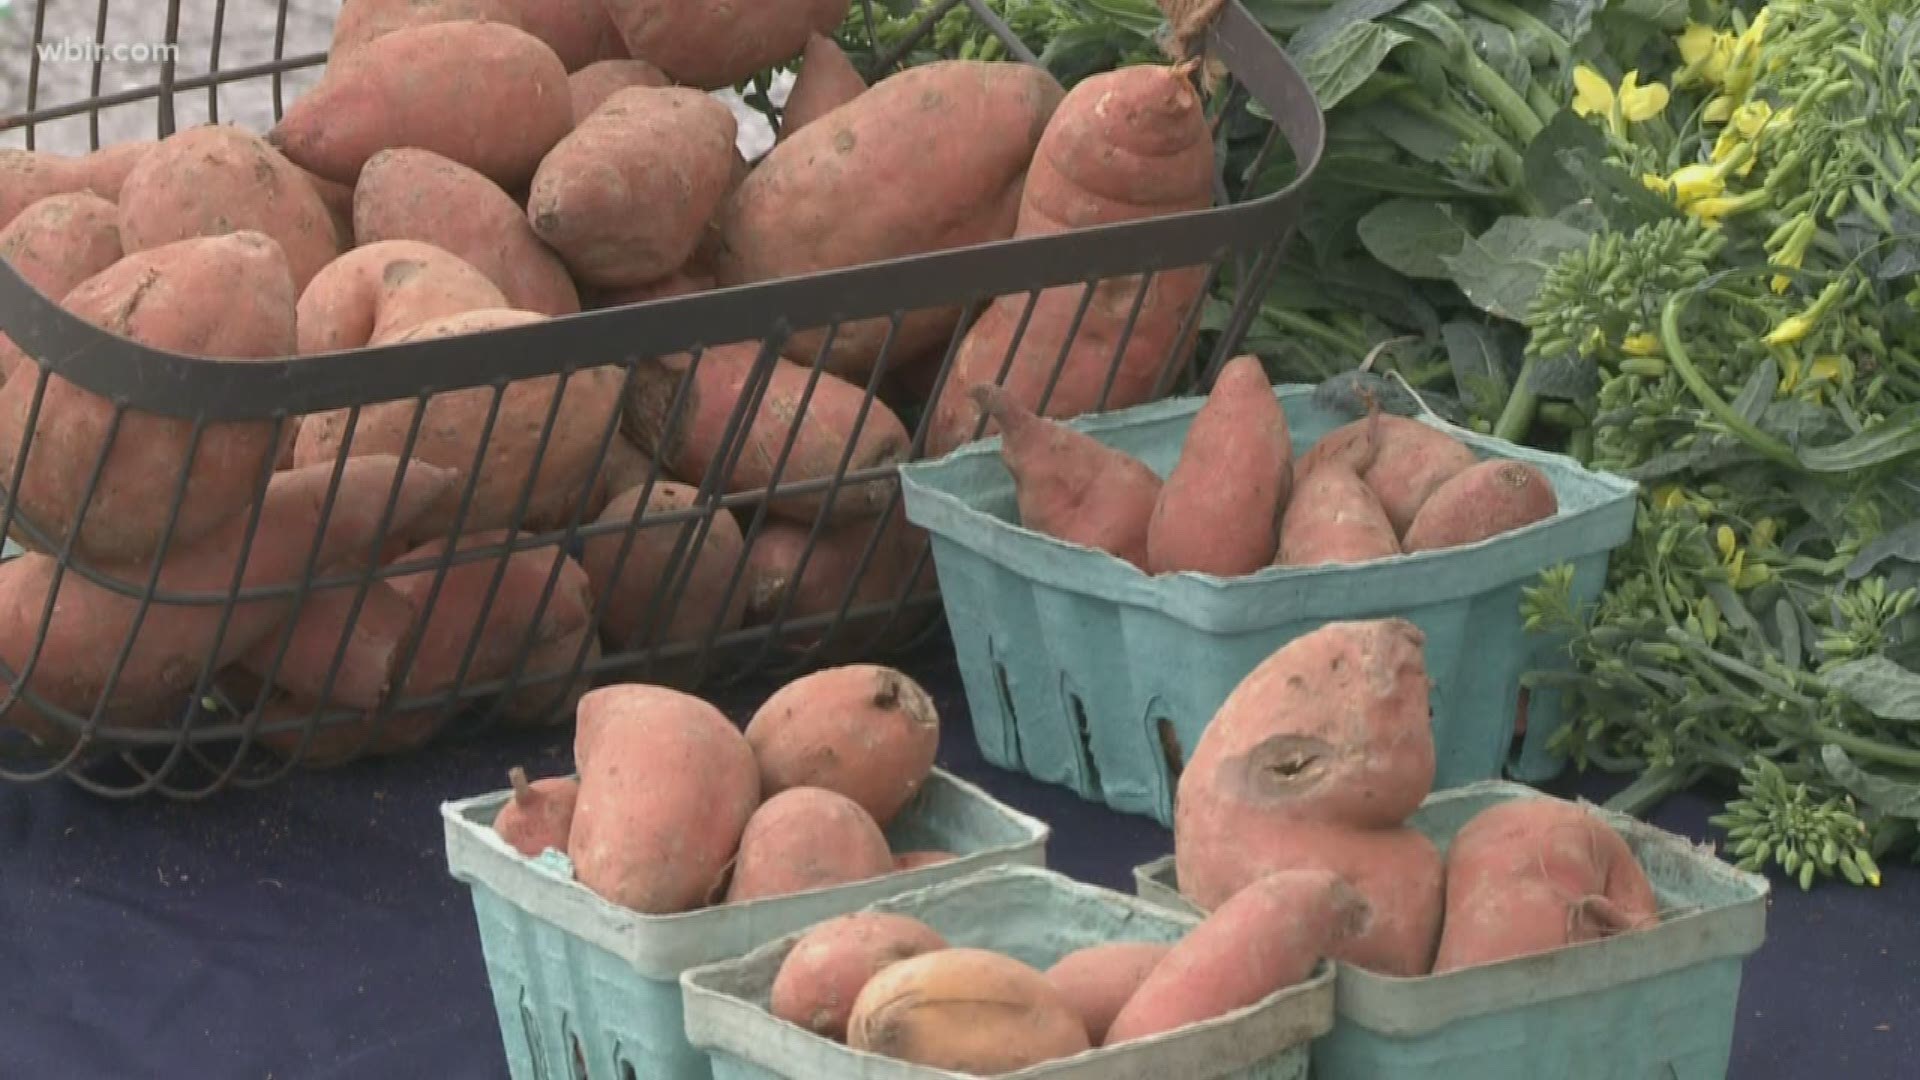 The Winter Farmer's Market moved outside to help feed people fresh vegetables and produce amid the coronavirus crisis.